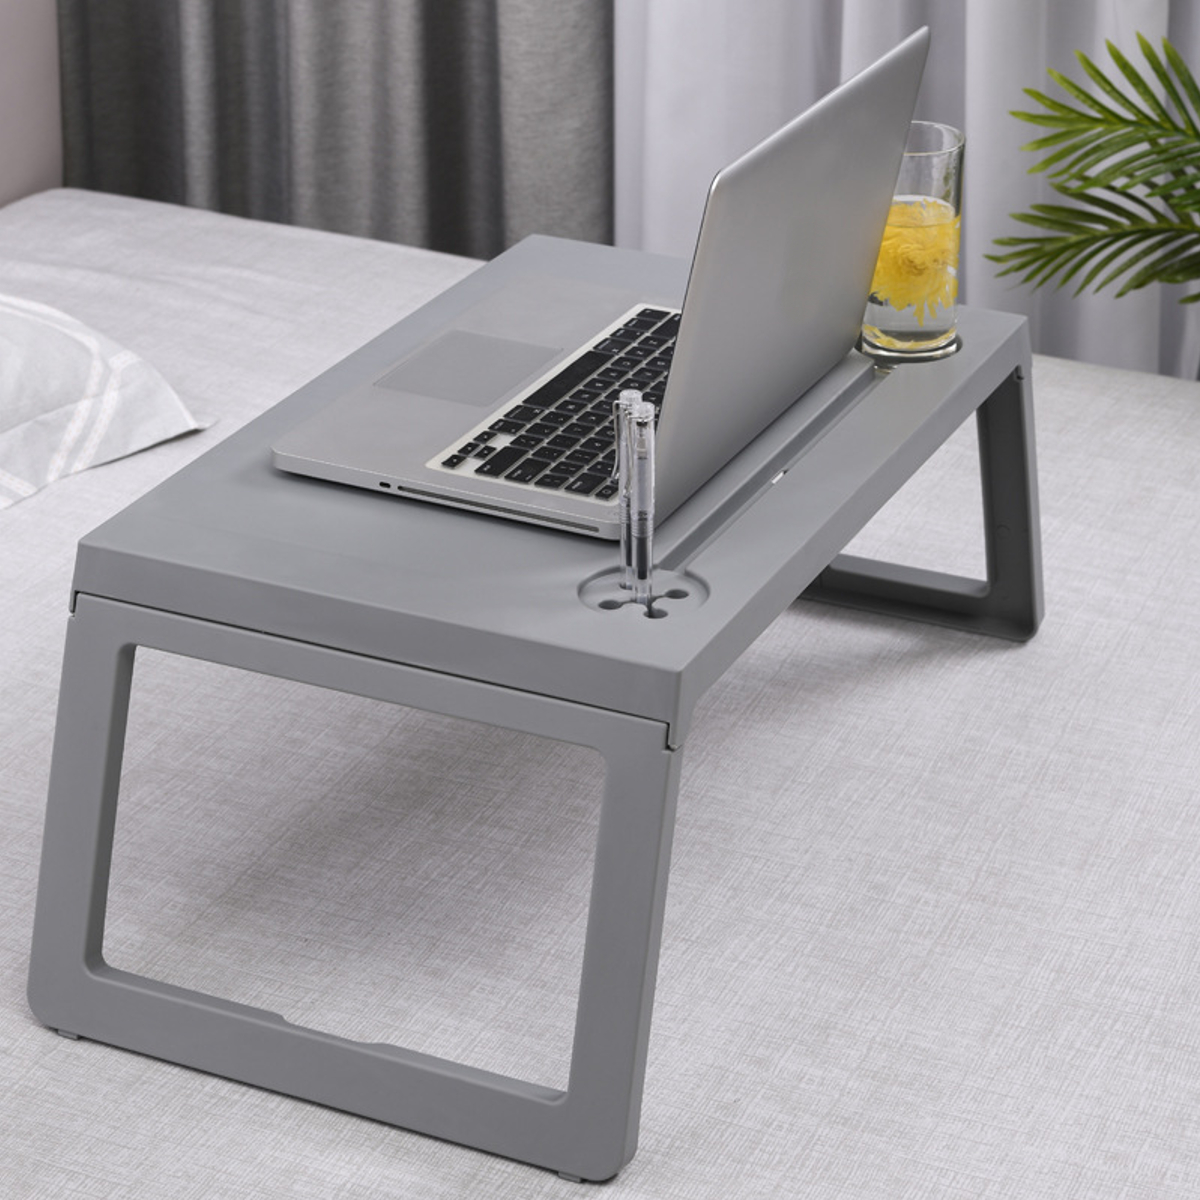 Folding Computer Table Portable Laptop Notebook Desktop Stand For Sofa Bed Perfect for Camping Outing Work or Home Use